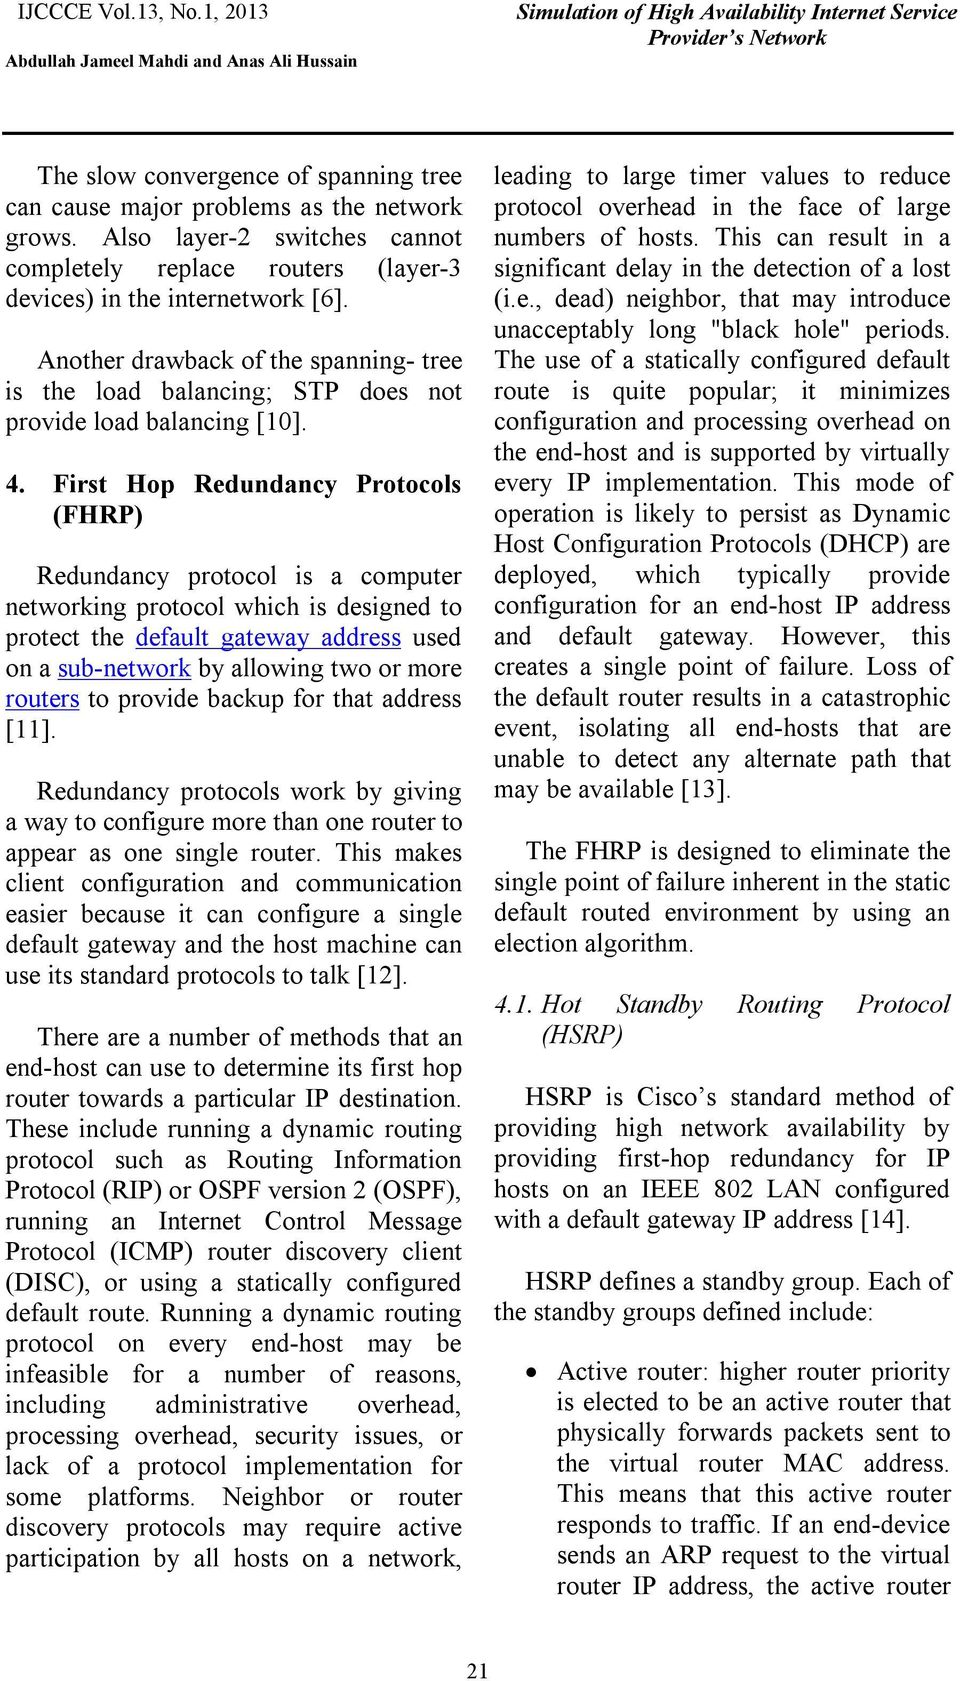 First Hop Redundancy Protocols (FHRP) Redundancy protocol is a computer networking protocol which is designed to protect the default gateway address used on a sub-network by allowing two or more